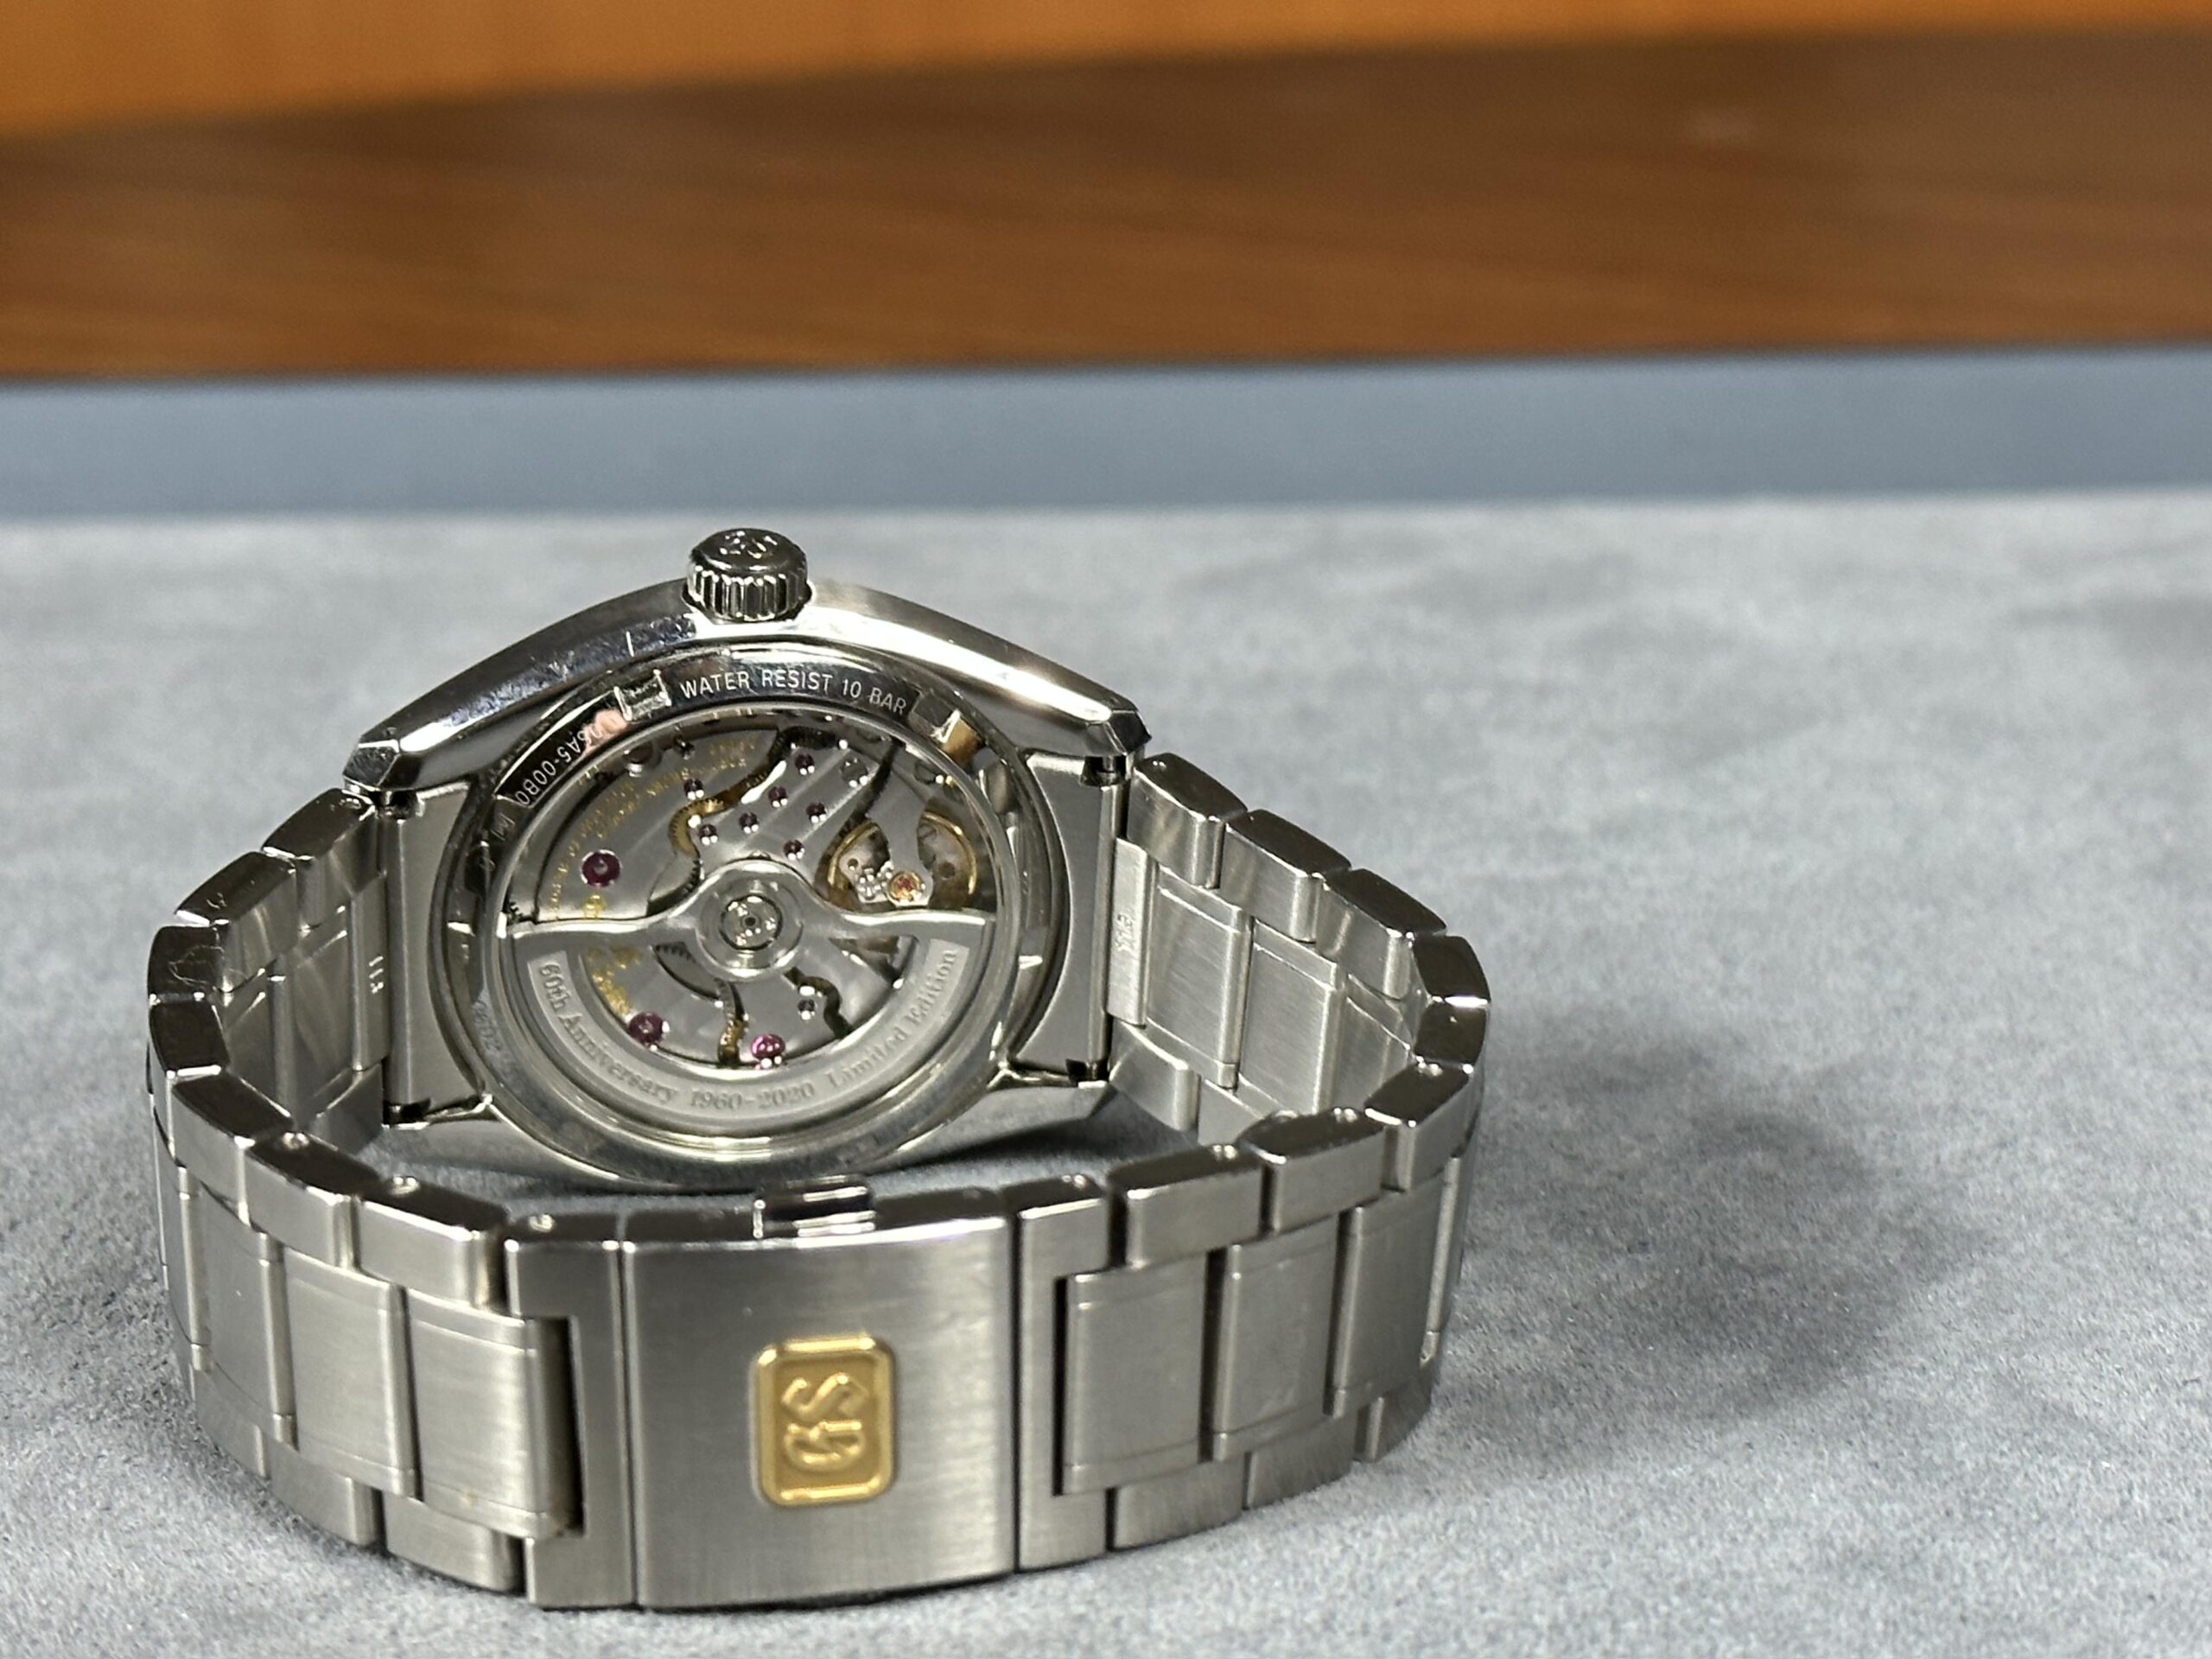 Seiko Limited Edition 60th Anniversary Grand Seiko - Crafted Time